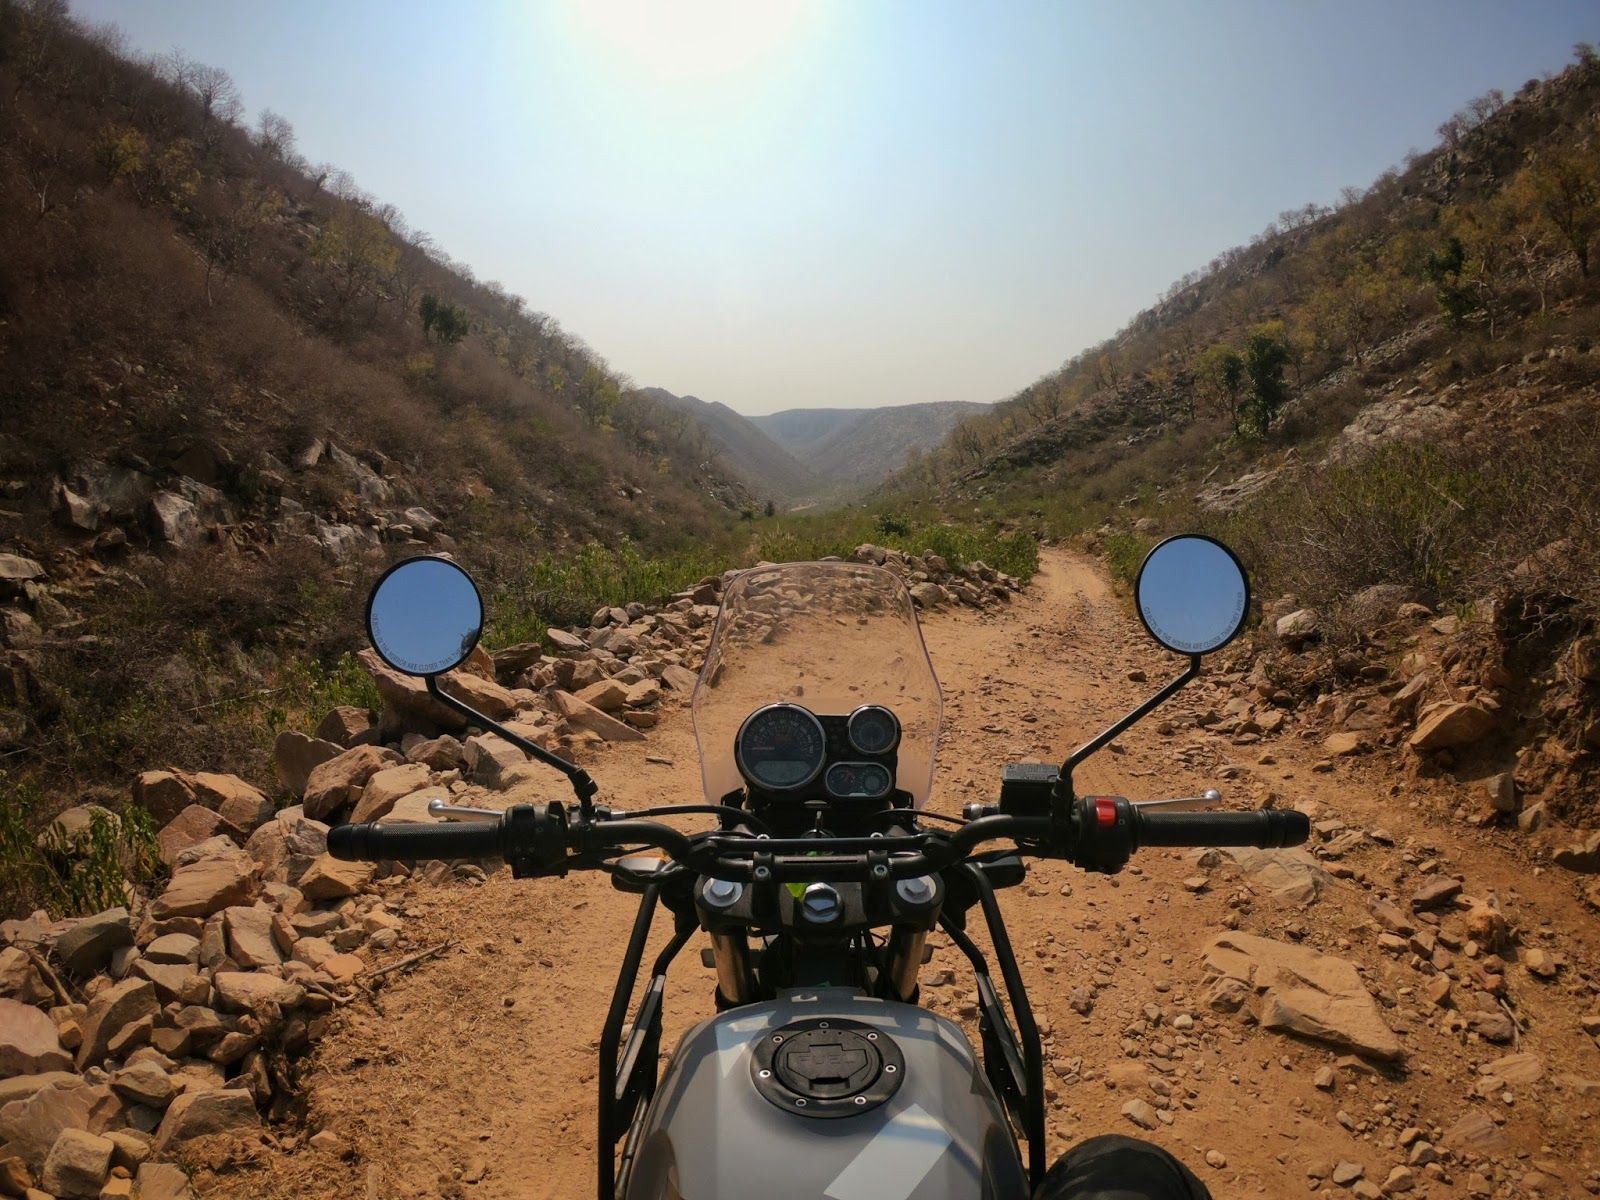 A Time To Ride: Riding the Himalayan Sleet in Jaipur